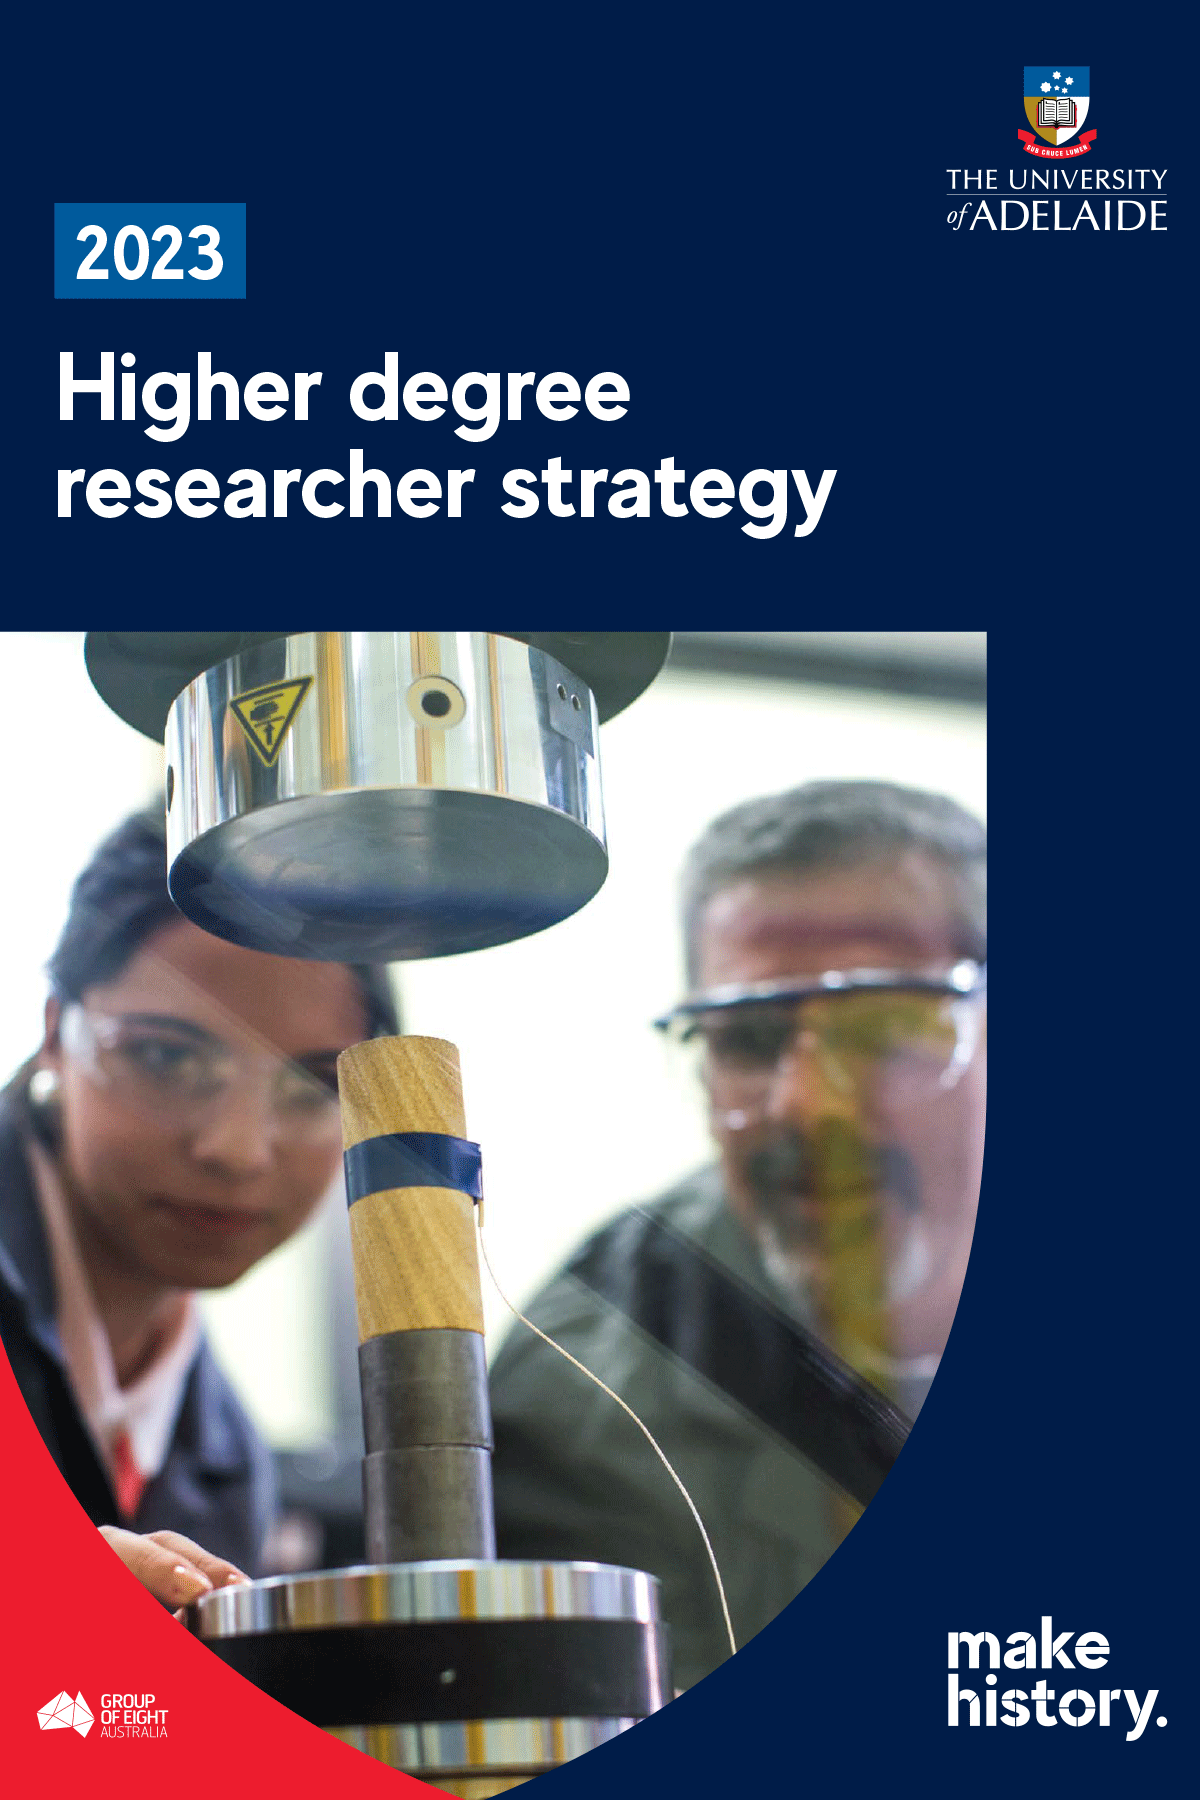 Front cover of 2023 higher degree researcher strategy document